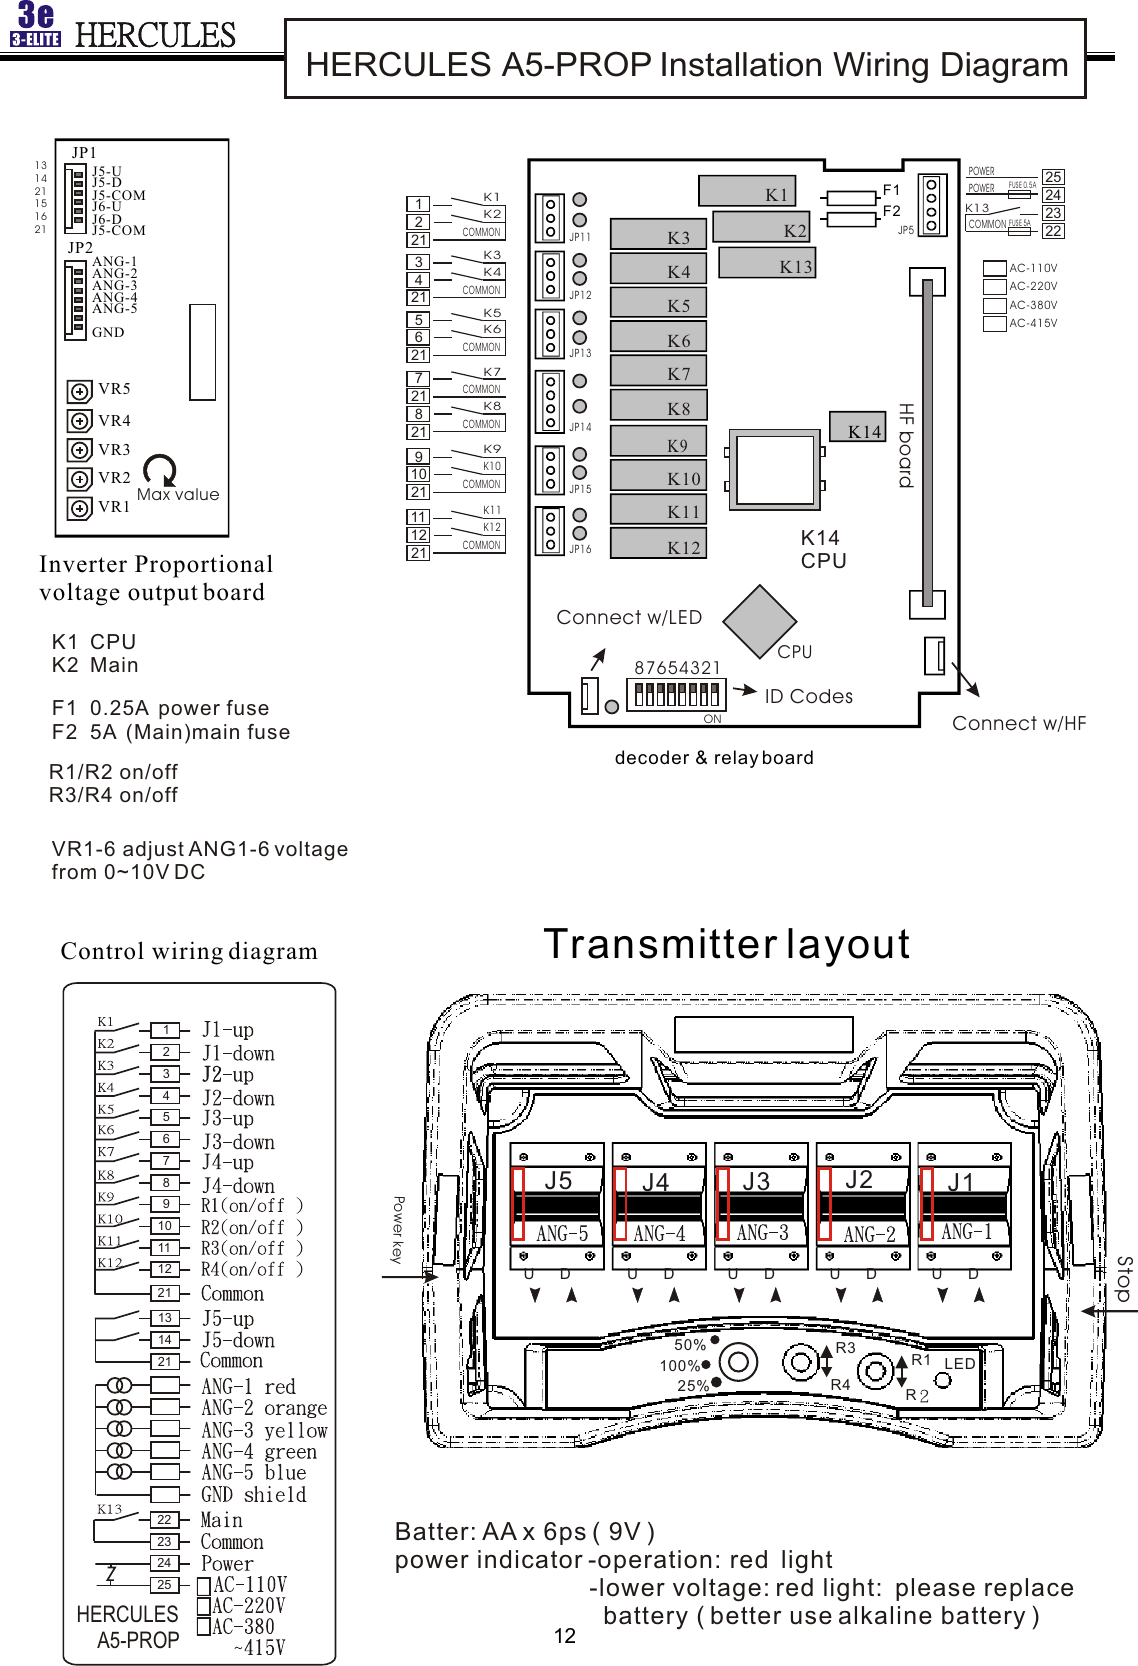 HERCULES A5-PROP Installation Wiring Diagram  K1  K2  CPUMainF1  0.25A  power fuseF2  5A  (Main)main fuse JP2JP1J5-UControl wiring diagramInverter Proportional  voltage output board22232425   HERCULES    A5-PROPBatter: AA x 6ps ( 9V )power indicator -operation: red  light                            -lower voltage: red light:  please replace                              battery ( better use alkaline battery )Transmitter layout12345678910111221J5-DJ5-COMJ6-UJ6-DJ5-COMANG-5GNDANG-1ANG-2ANG-3ANG-4VR5VR4VR3VR2VR1131421Max valueVR1-6 adjust ANG1-6 voltagefrom 0~10V DC13142115162187654321CPUON  decoder &amp; relay board  K14JP11K14  CPUJP12JP13JP14JP15JP16 K10K11K12K3K4K5K6K7K8 K9K2K1K13Connect w/LEDID CodesF1K13COMMON FUSE 5APOWERPOWER FUSE 0.5AJP5F2AC-110VAC-220VAC-380VAC-415V25242322Connect w/HFHF board           K1K2COMMONK3K4COMMONK5K6COMMONK8COMMONK9K10COMMONK7COMMON  K11K12COMMON12213421562178212121219101112 R1/R2 on/offR3/R4 on/offStopLEDR1RR3R450%100%25%U      DJ1J2J3J4J5U      DU      DU      DU      DPower key12